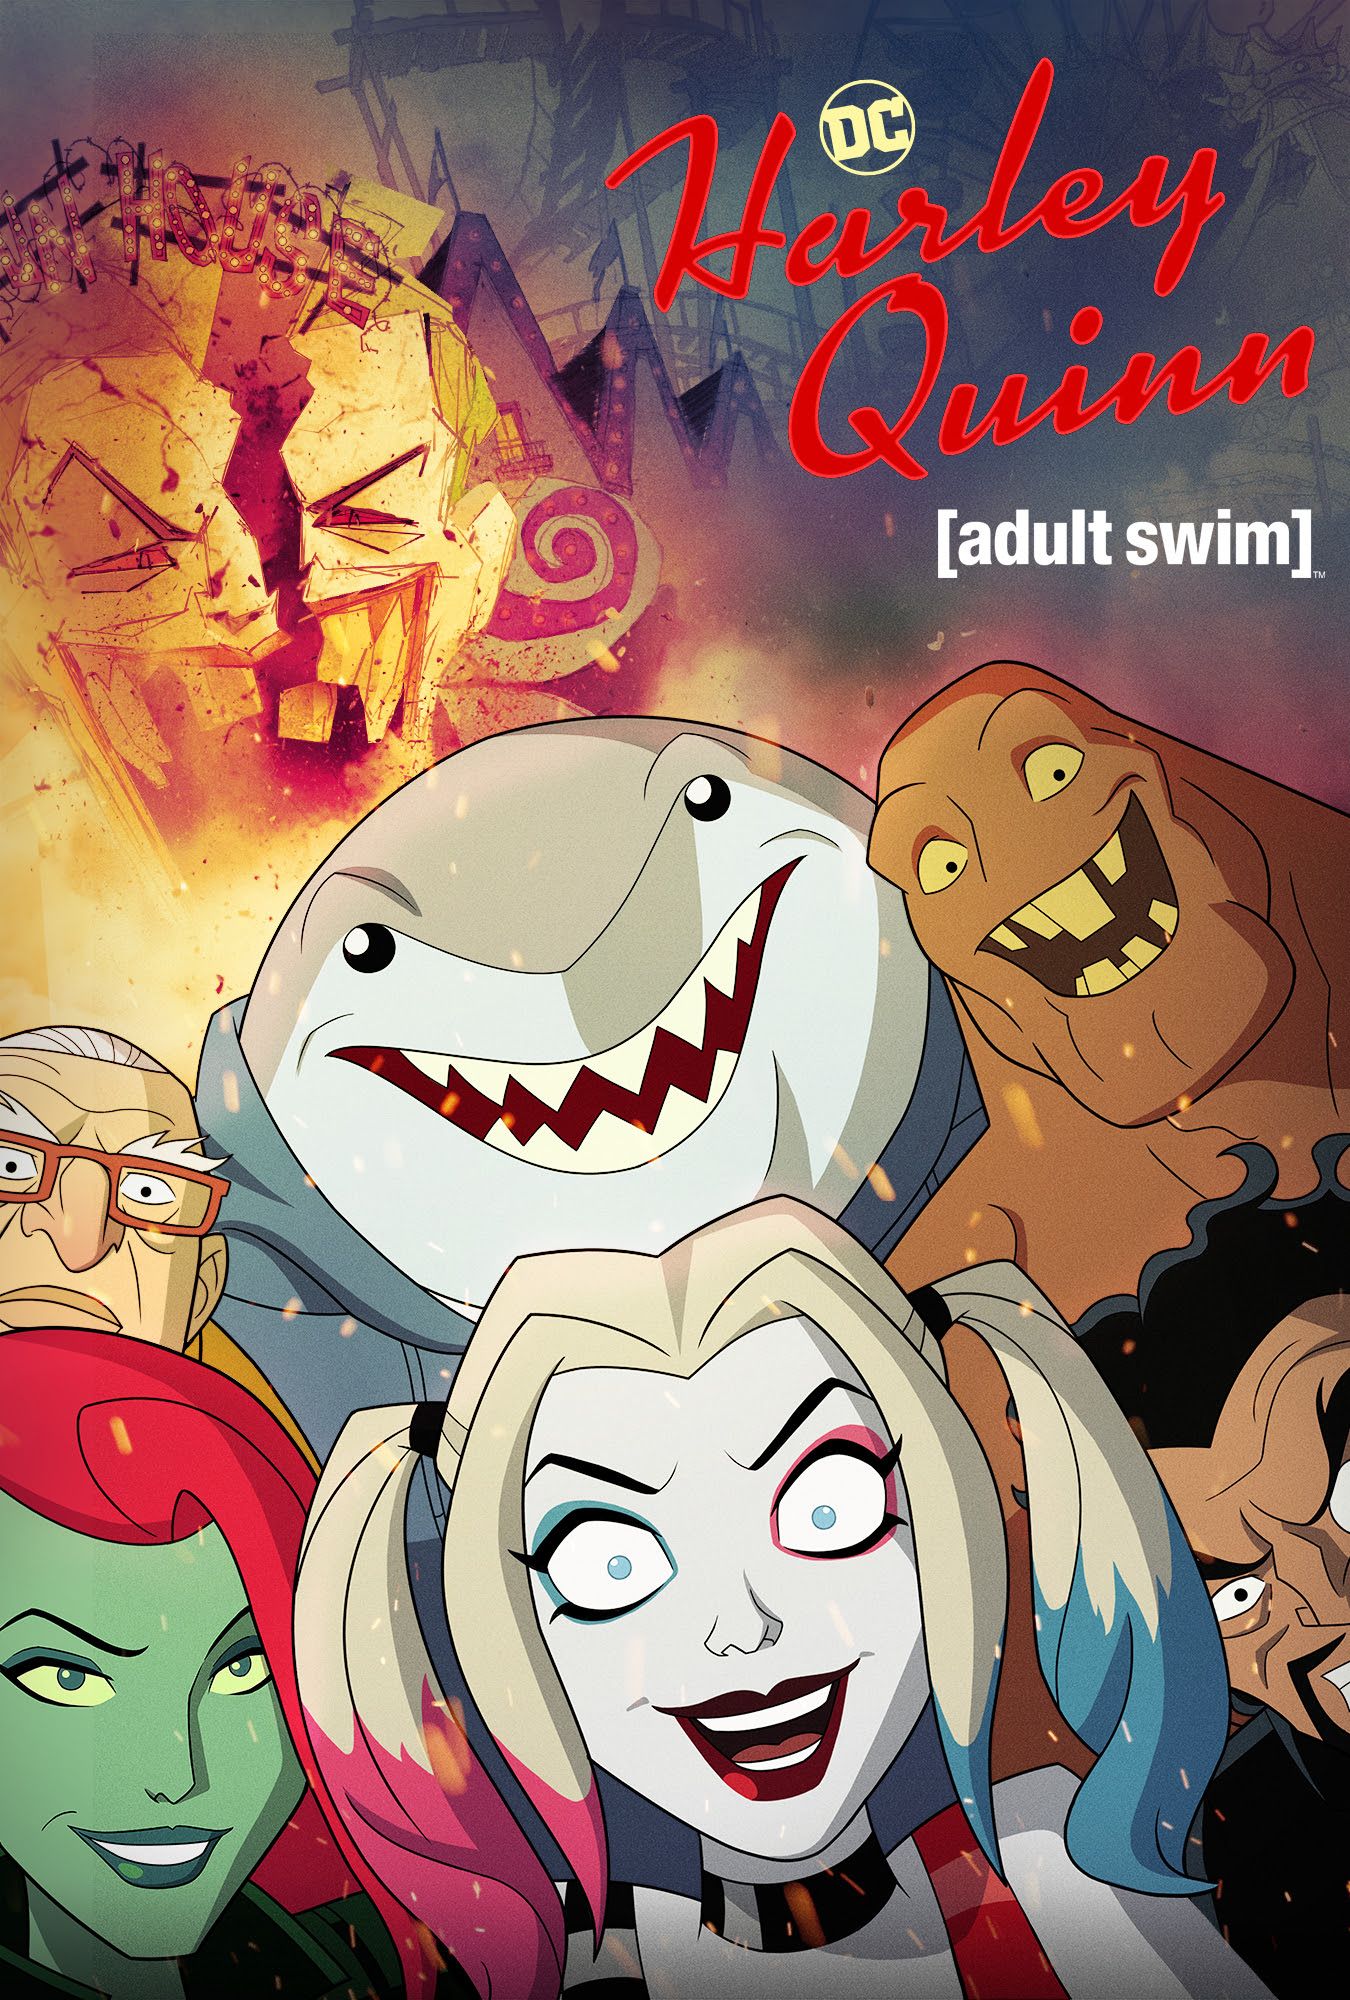 Gothams Queenpin Harley Quinn Comes to Adult Swim